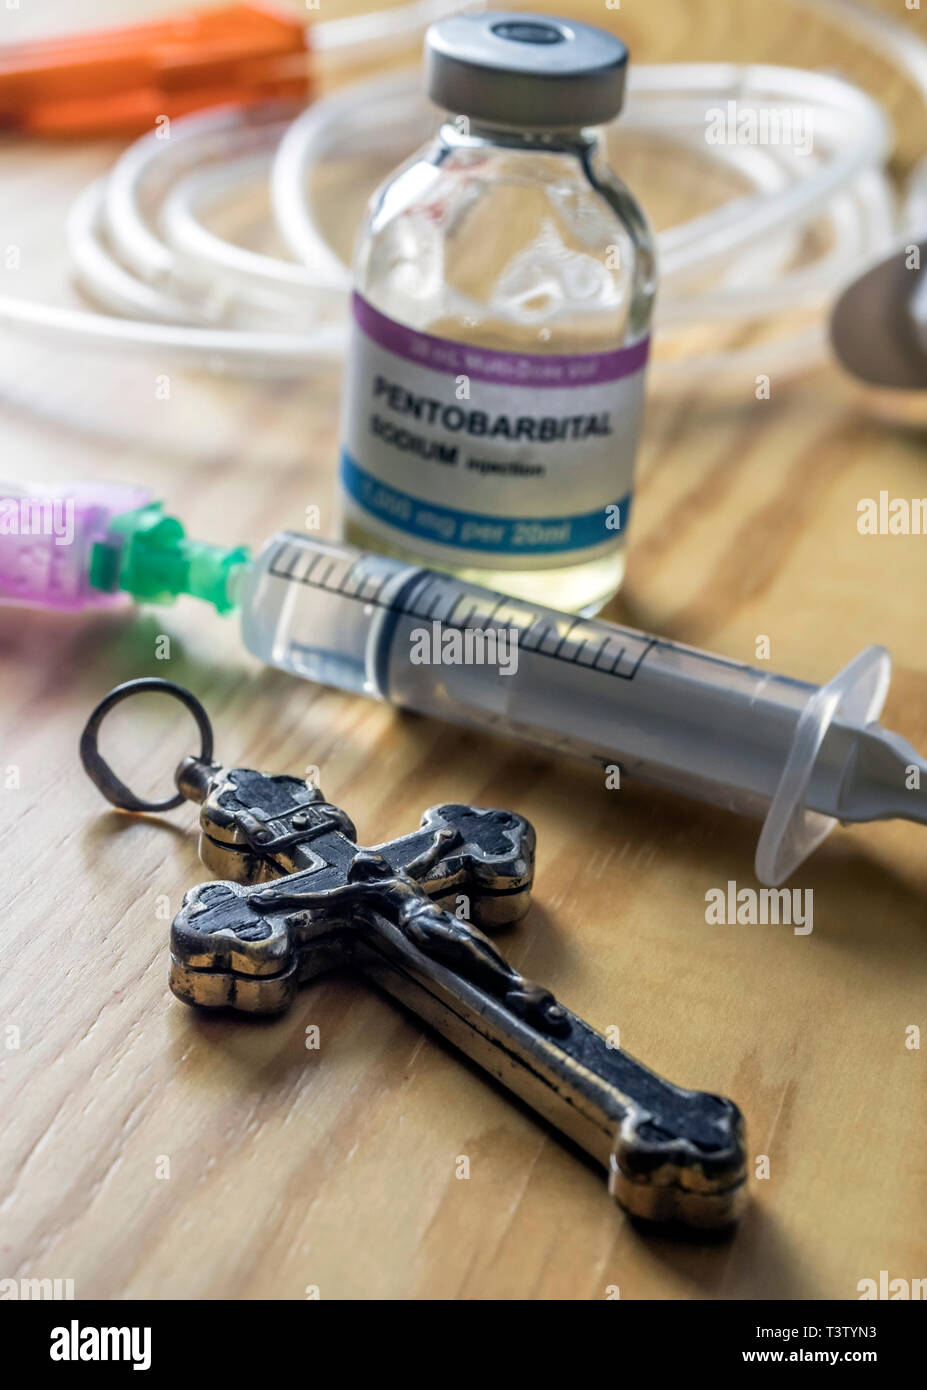 Vial with doses of pentobarbital next to a crucifix, Debate between life and death, religious belief in the face of euthanasia, conceptual image Stock Photo